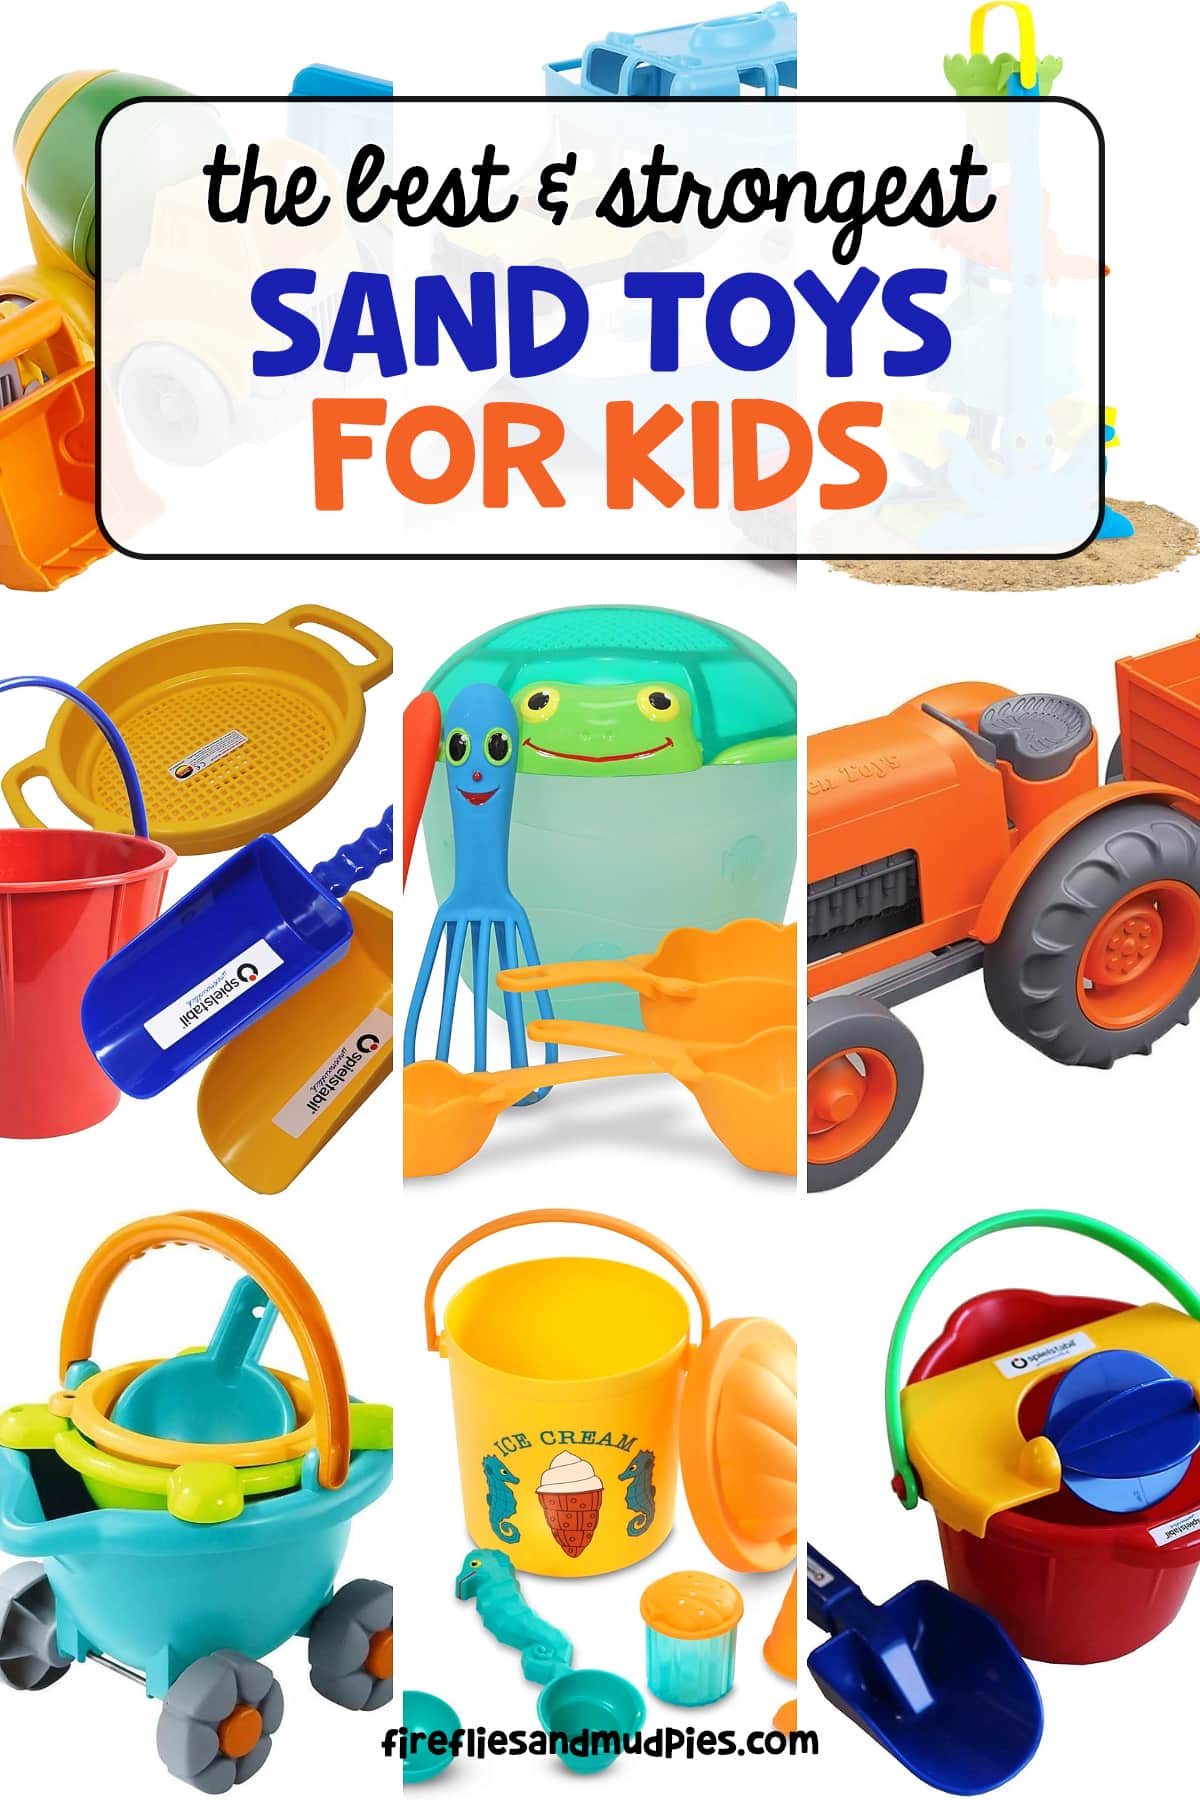 The Best Sand Toys for Kids - Purchasing high quality sand toys for kids once saves money and prevents pounds of worthless, broken plastic from entering the landfill. via @firefliesandmudpies